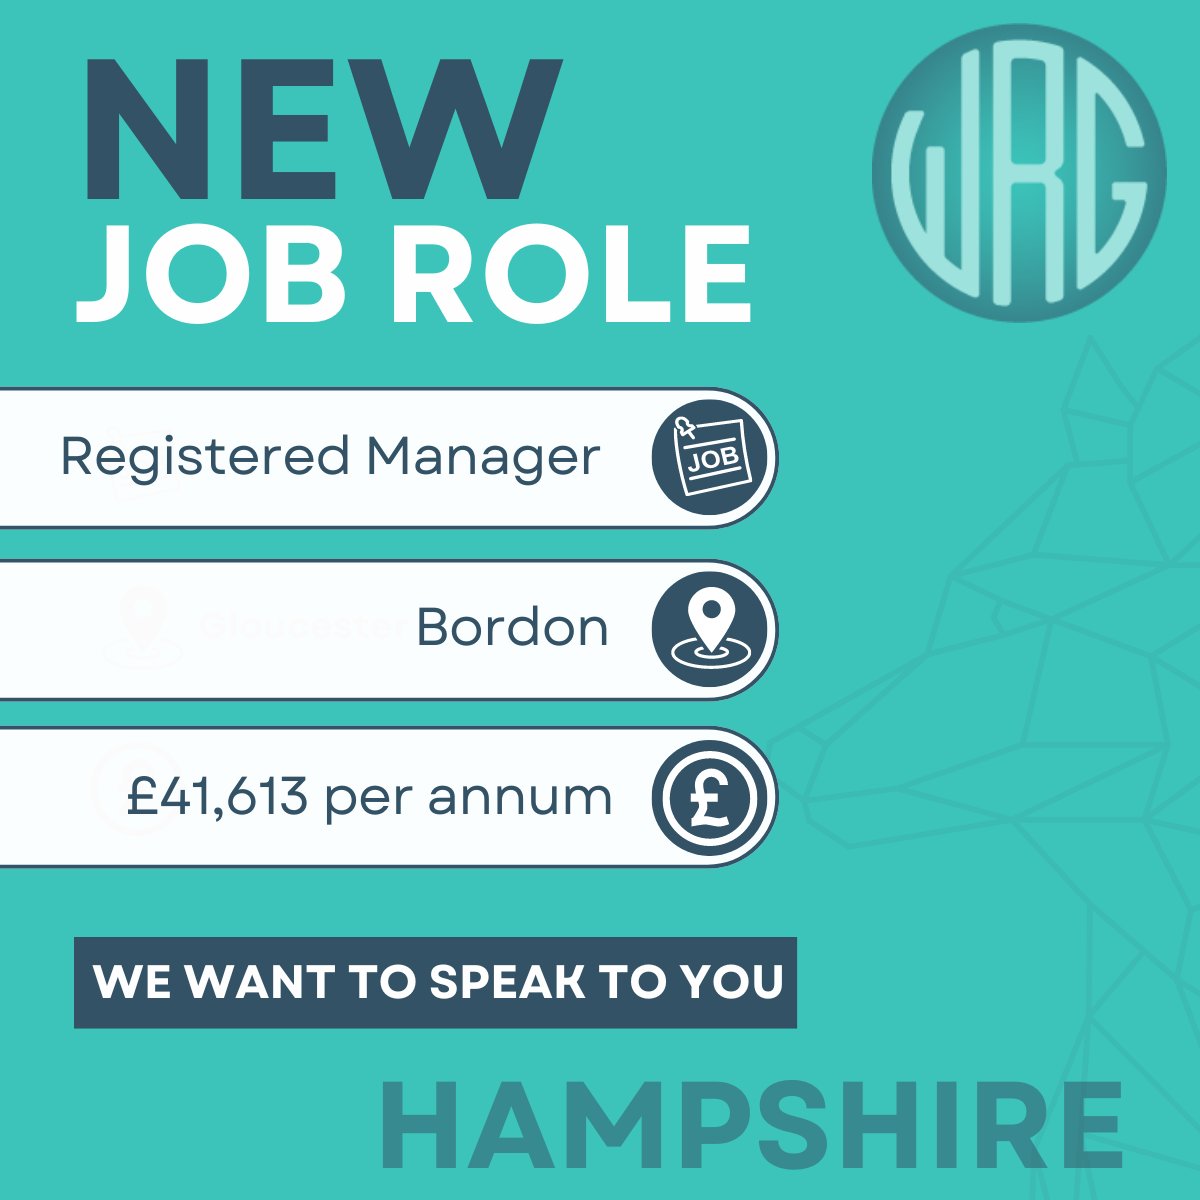 ⭐️Registered Manager
📍Bordon
💰£41,613 per annum
✔️Full-time permanent contract

Click here to apply now! adr.to/3g3uaai

#HampshireJobs #RegisteredManagerJobsUK #RegisteredManager #UKHealthandsocialcare #adultsocialcare #makeadifference #wolfcare #wolfjobs